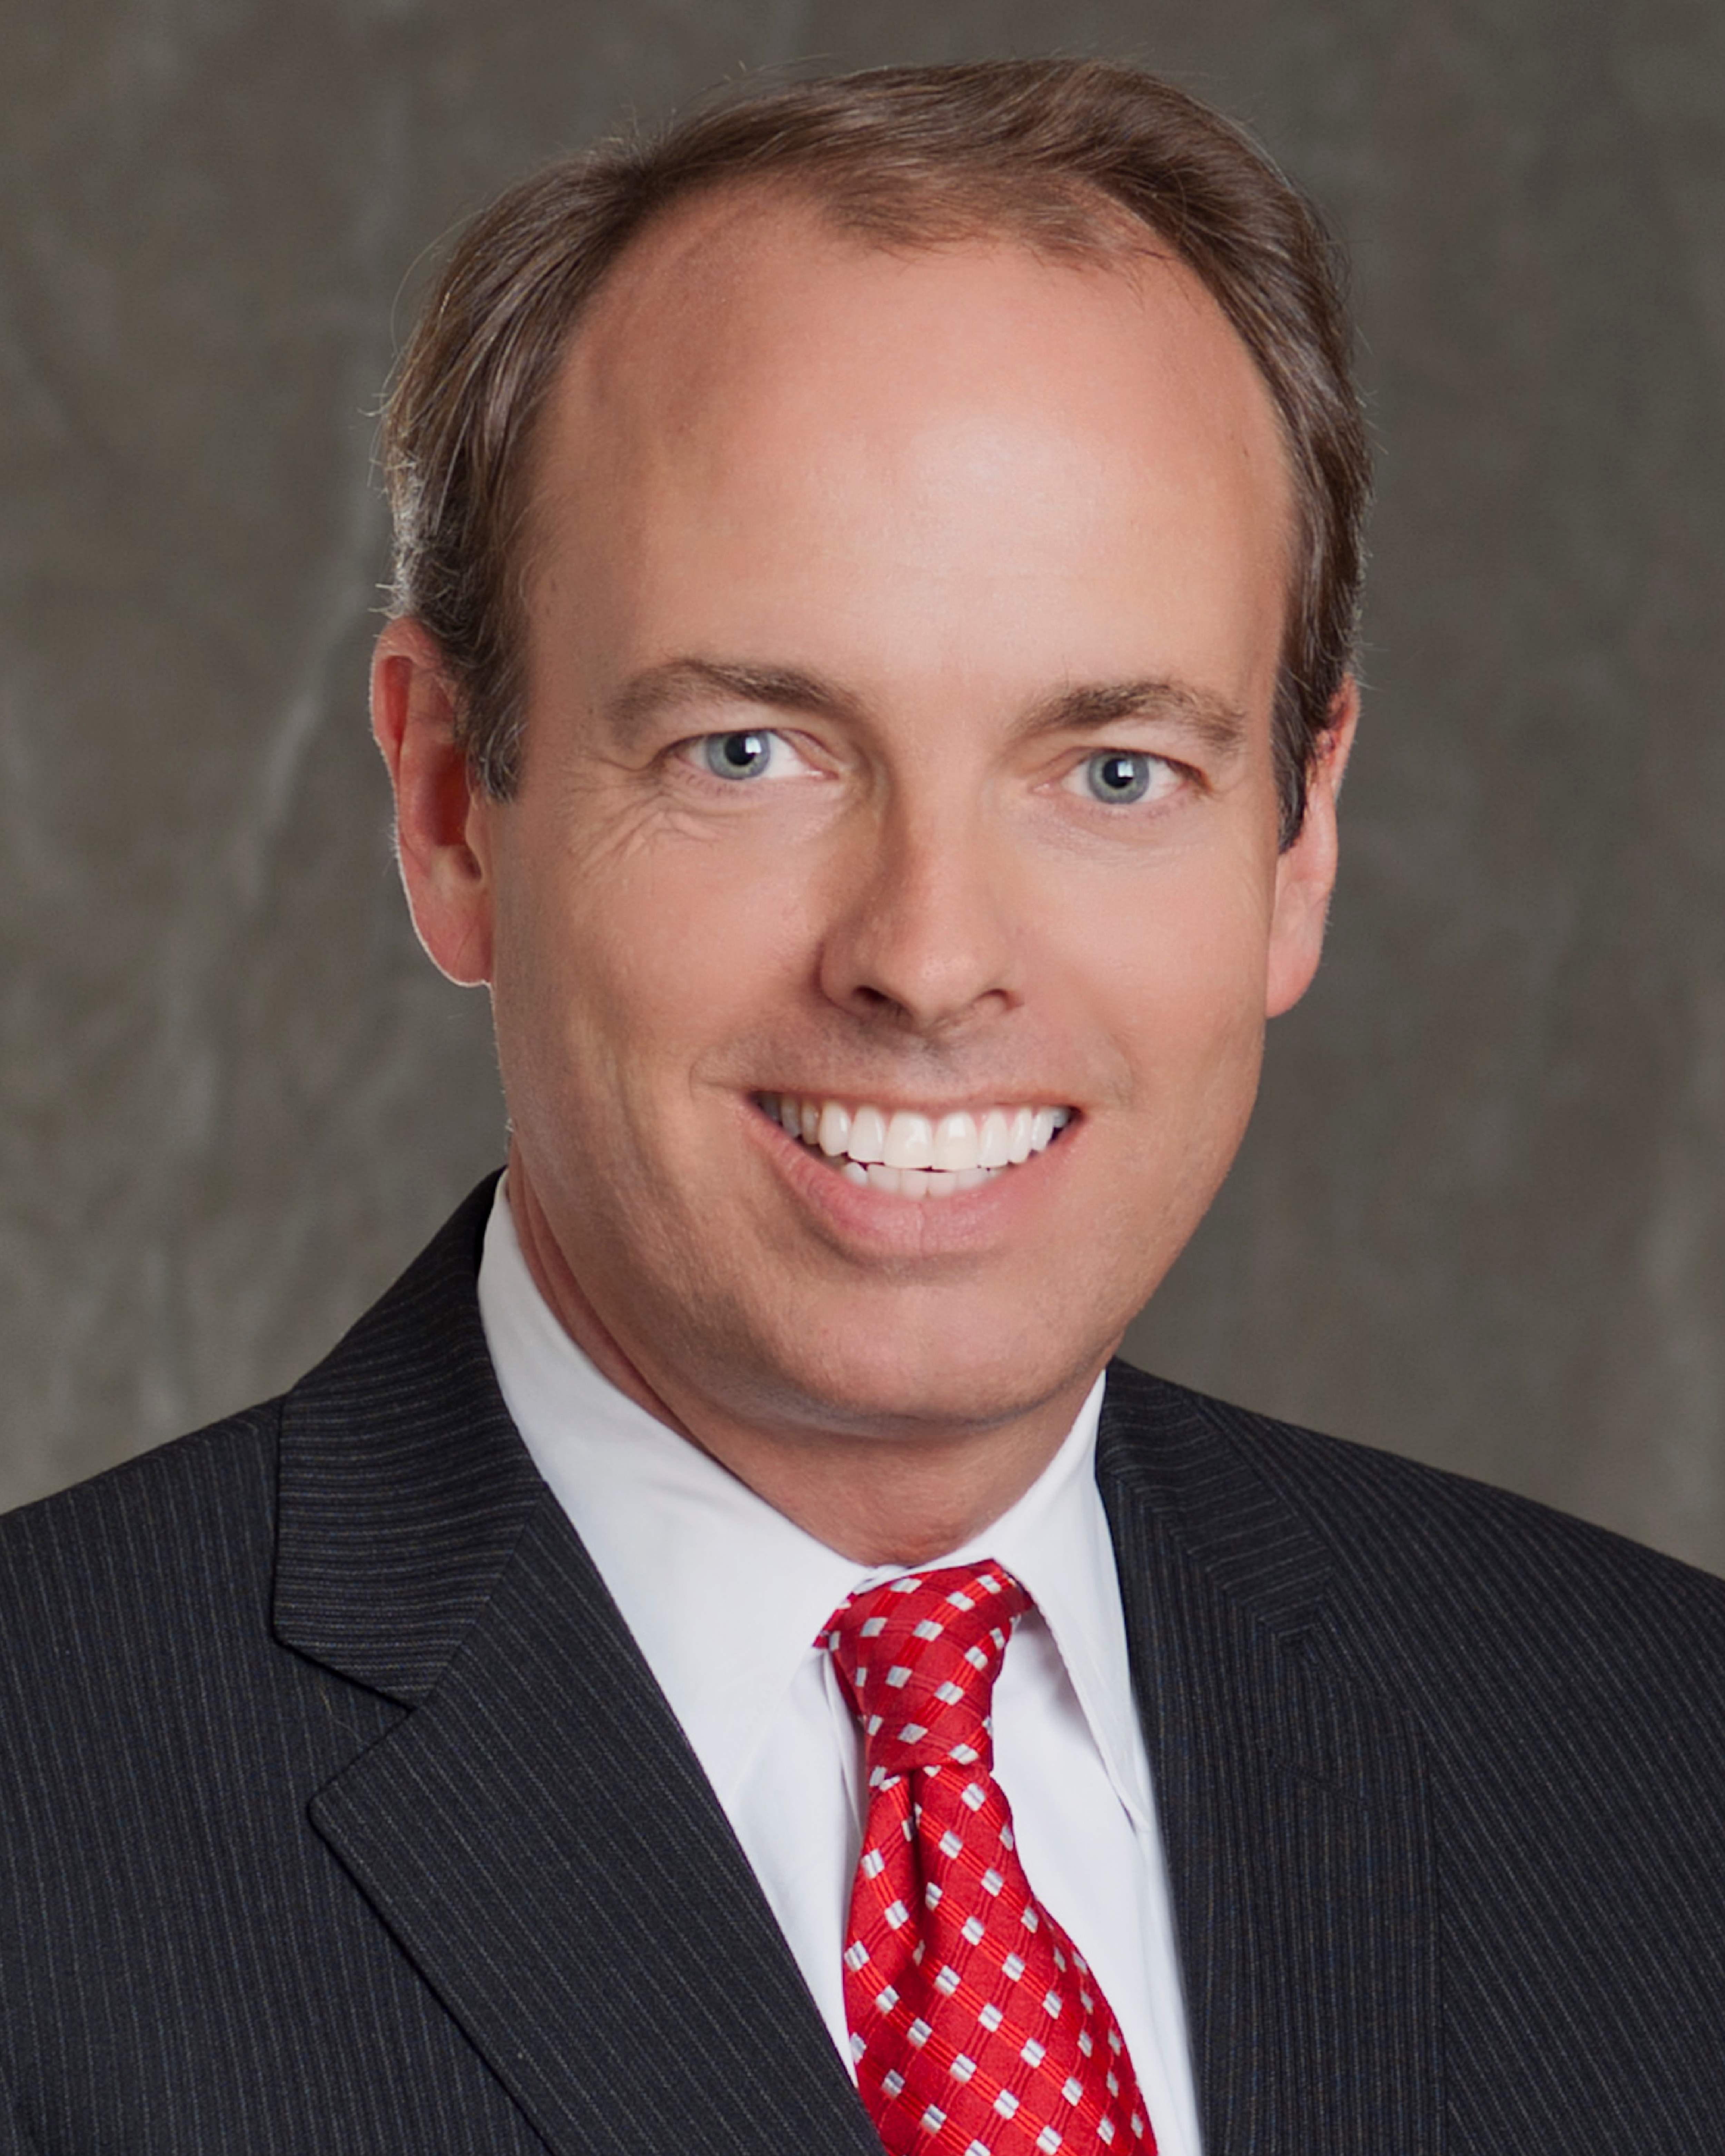 Robert Broeksmit, the new President and Chief Executive Officer of the Mortgage Bankers Association (MBA)